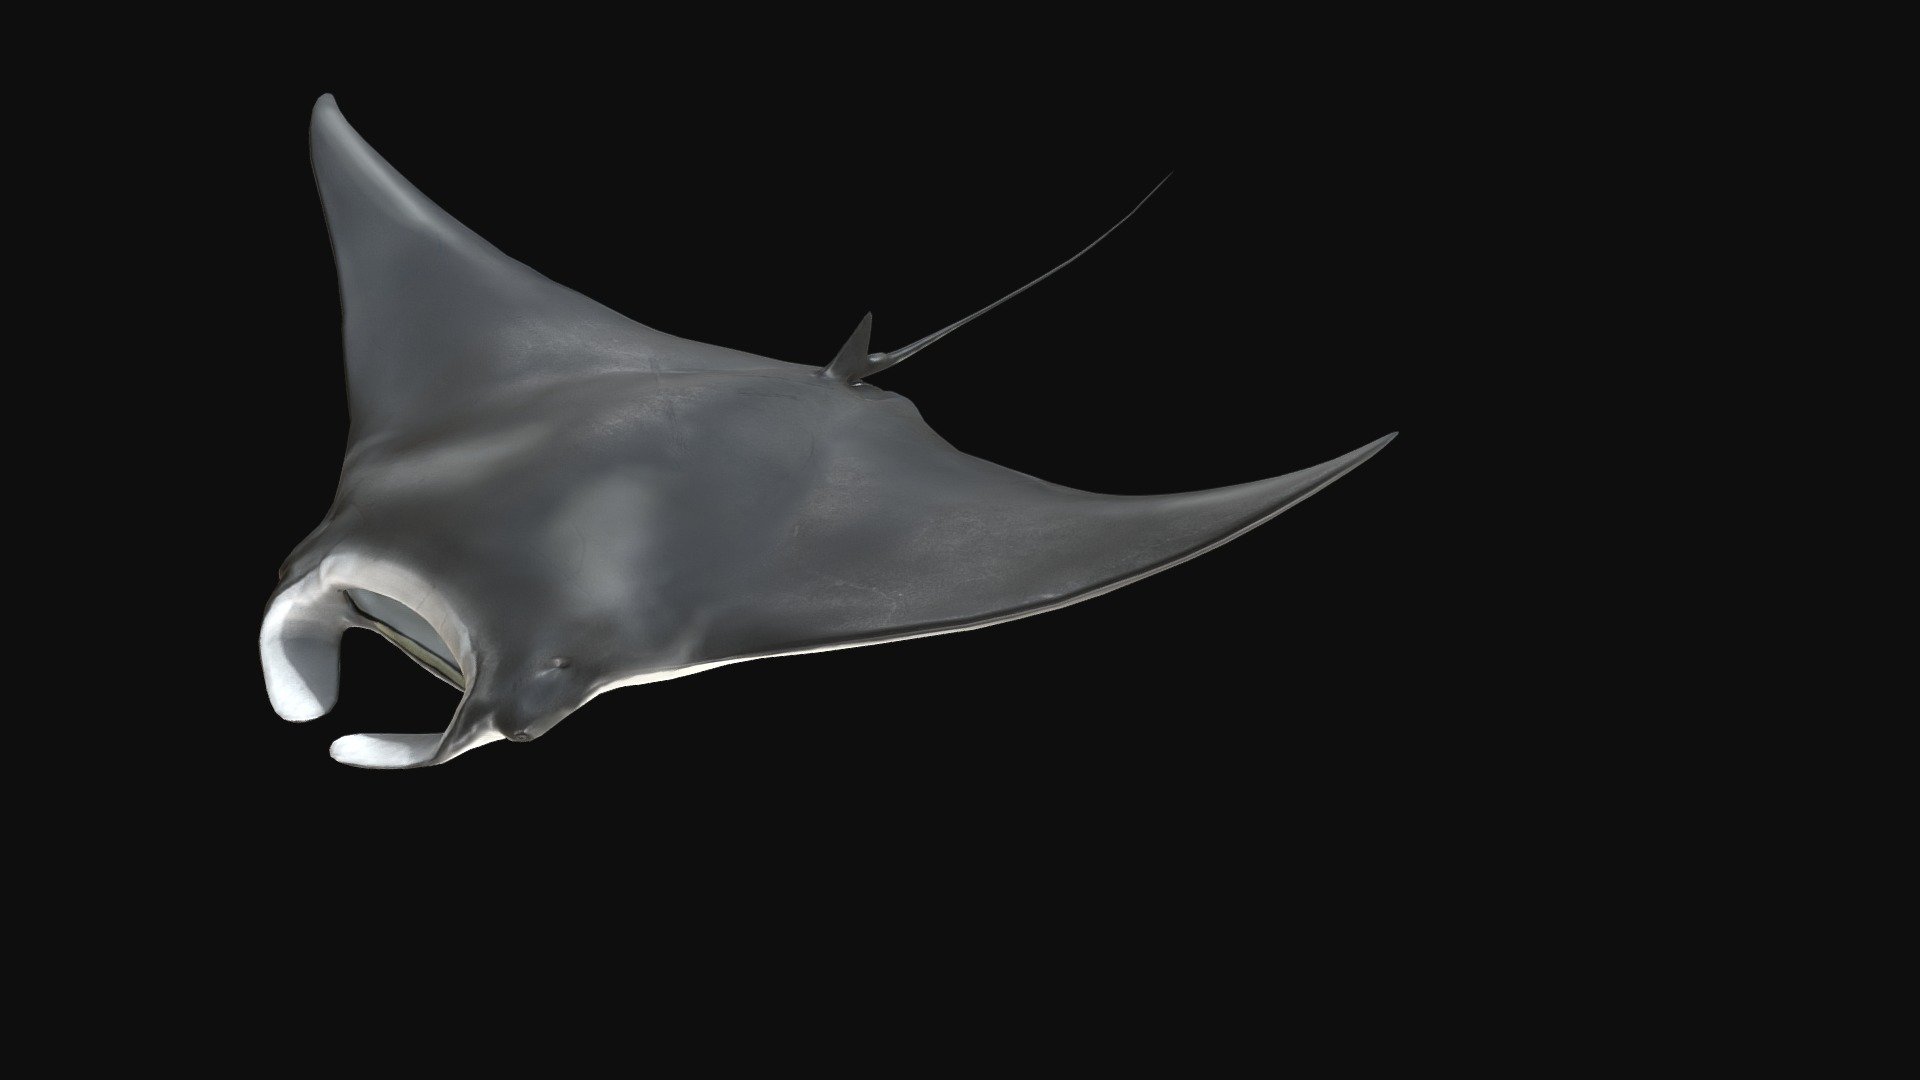 This is an feeding animation of a subadult male Manta Ray (“Skye” Mobula c.f. birostris, disk width of 2.5 m) that was reconstructed from a combination of drone, gopro, and other video imagery and morphometric data.  Note the twisting of the cephalic fins, which are used during feeding. Skye was filmed primarily while swimming off the coast of Palm beach, Florida.  Jessica Pate and her team with the Marine Megafauna Foundation (www.marinemegafauna.org) were instrumental for filming Skye and providing access to other data on Manta Rays.  The ANGARI Foundation (www.angari.org) and Angela Rosenberg coordinated and supported this research.  Jonathan Bayuk and Ken Morton kindly donated funding to enable this research.  CG artist Johnson Martin used the data provided to reconstruct and animate the model.

Downloads are freely available for creative and non-profit use. To inquire about licensing, please visit www.digitallife3d.org 3d model